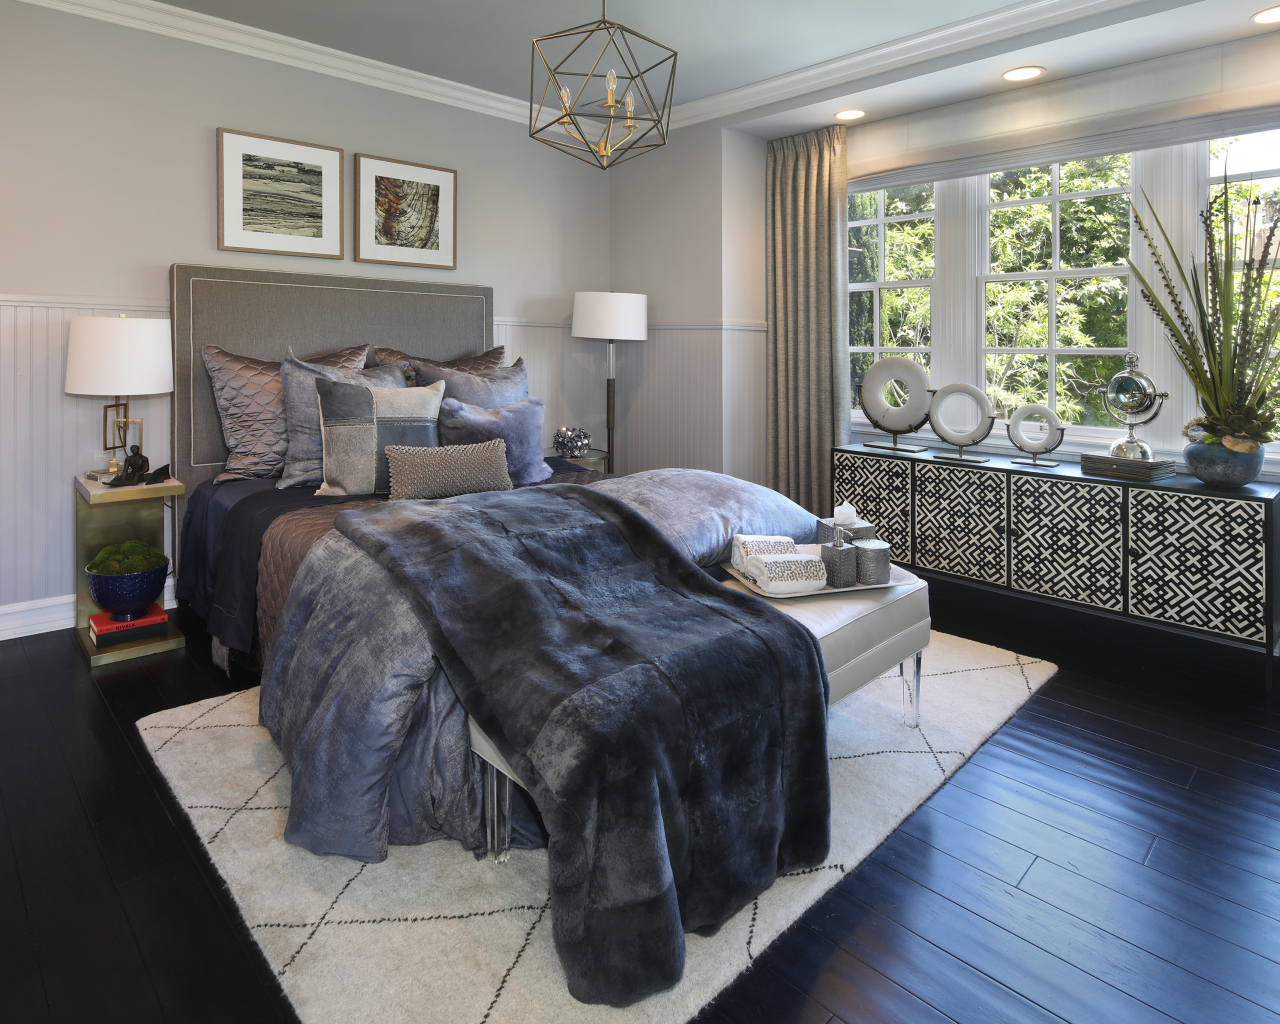 Large bed with soft gray bedspread in the bedroom